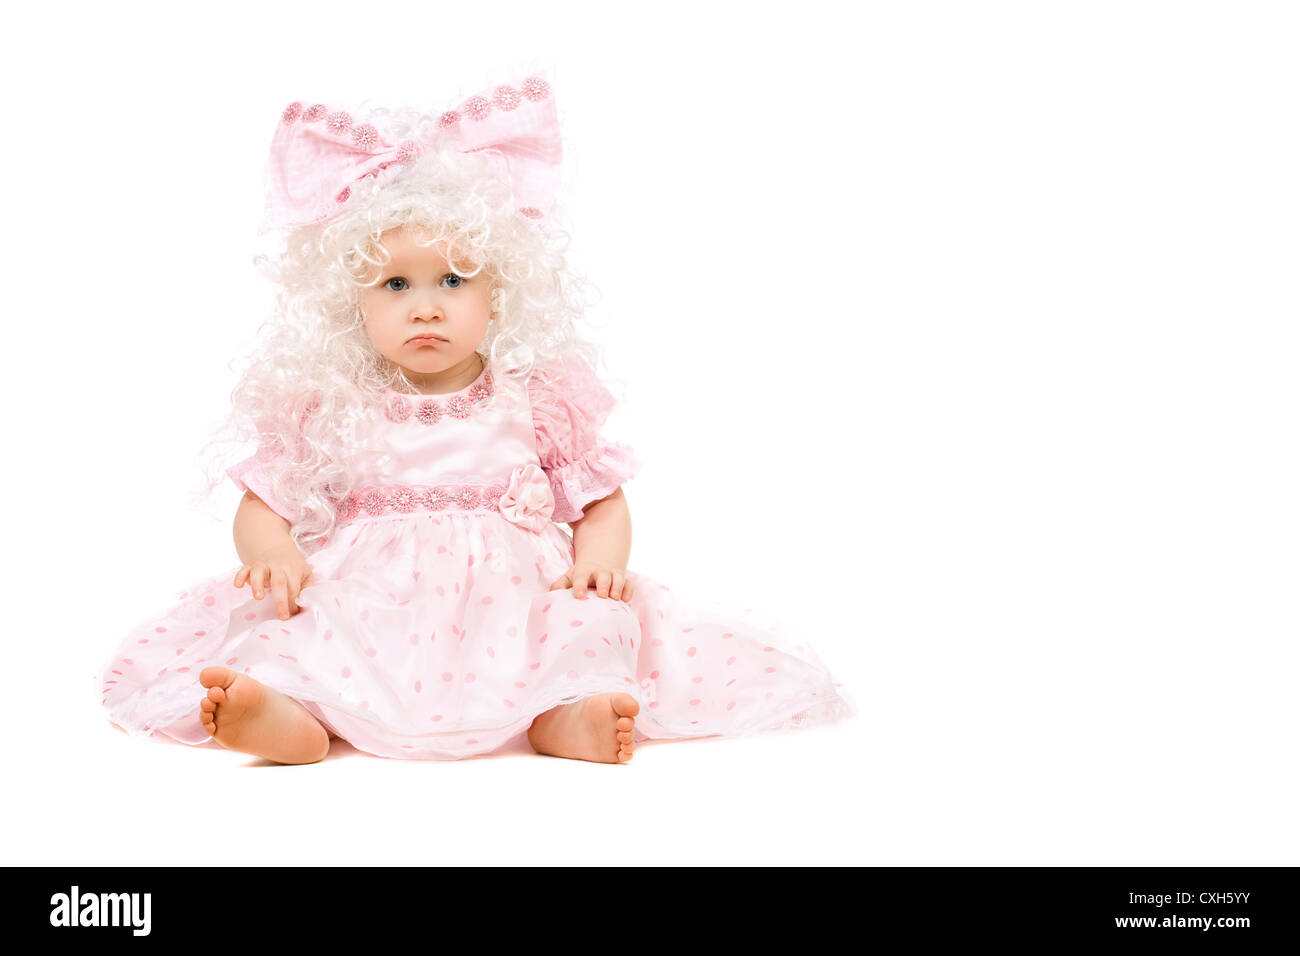 Sad baby girl in a pink dress Stock Photo